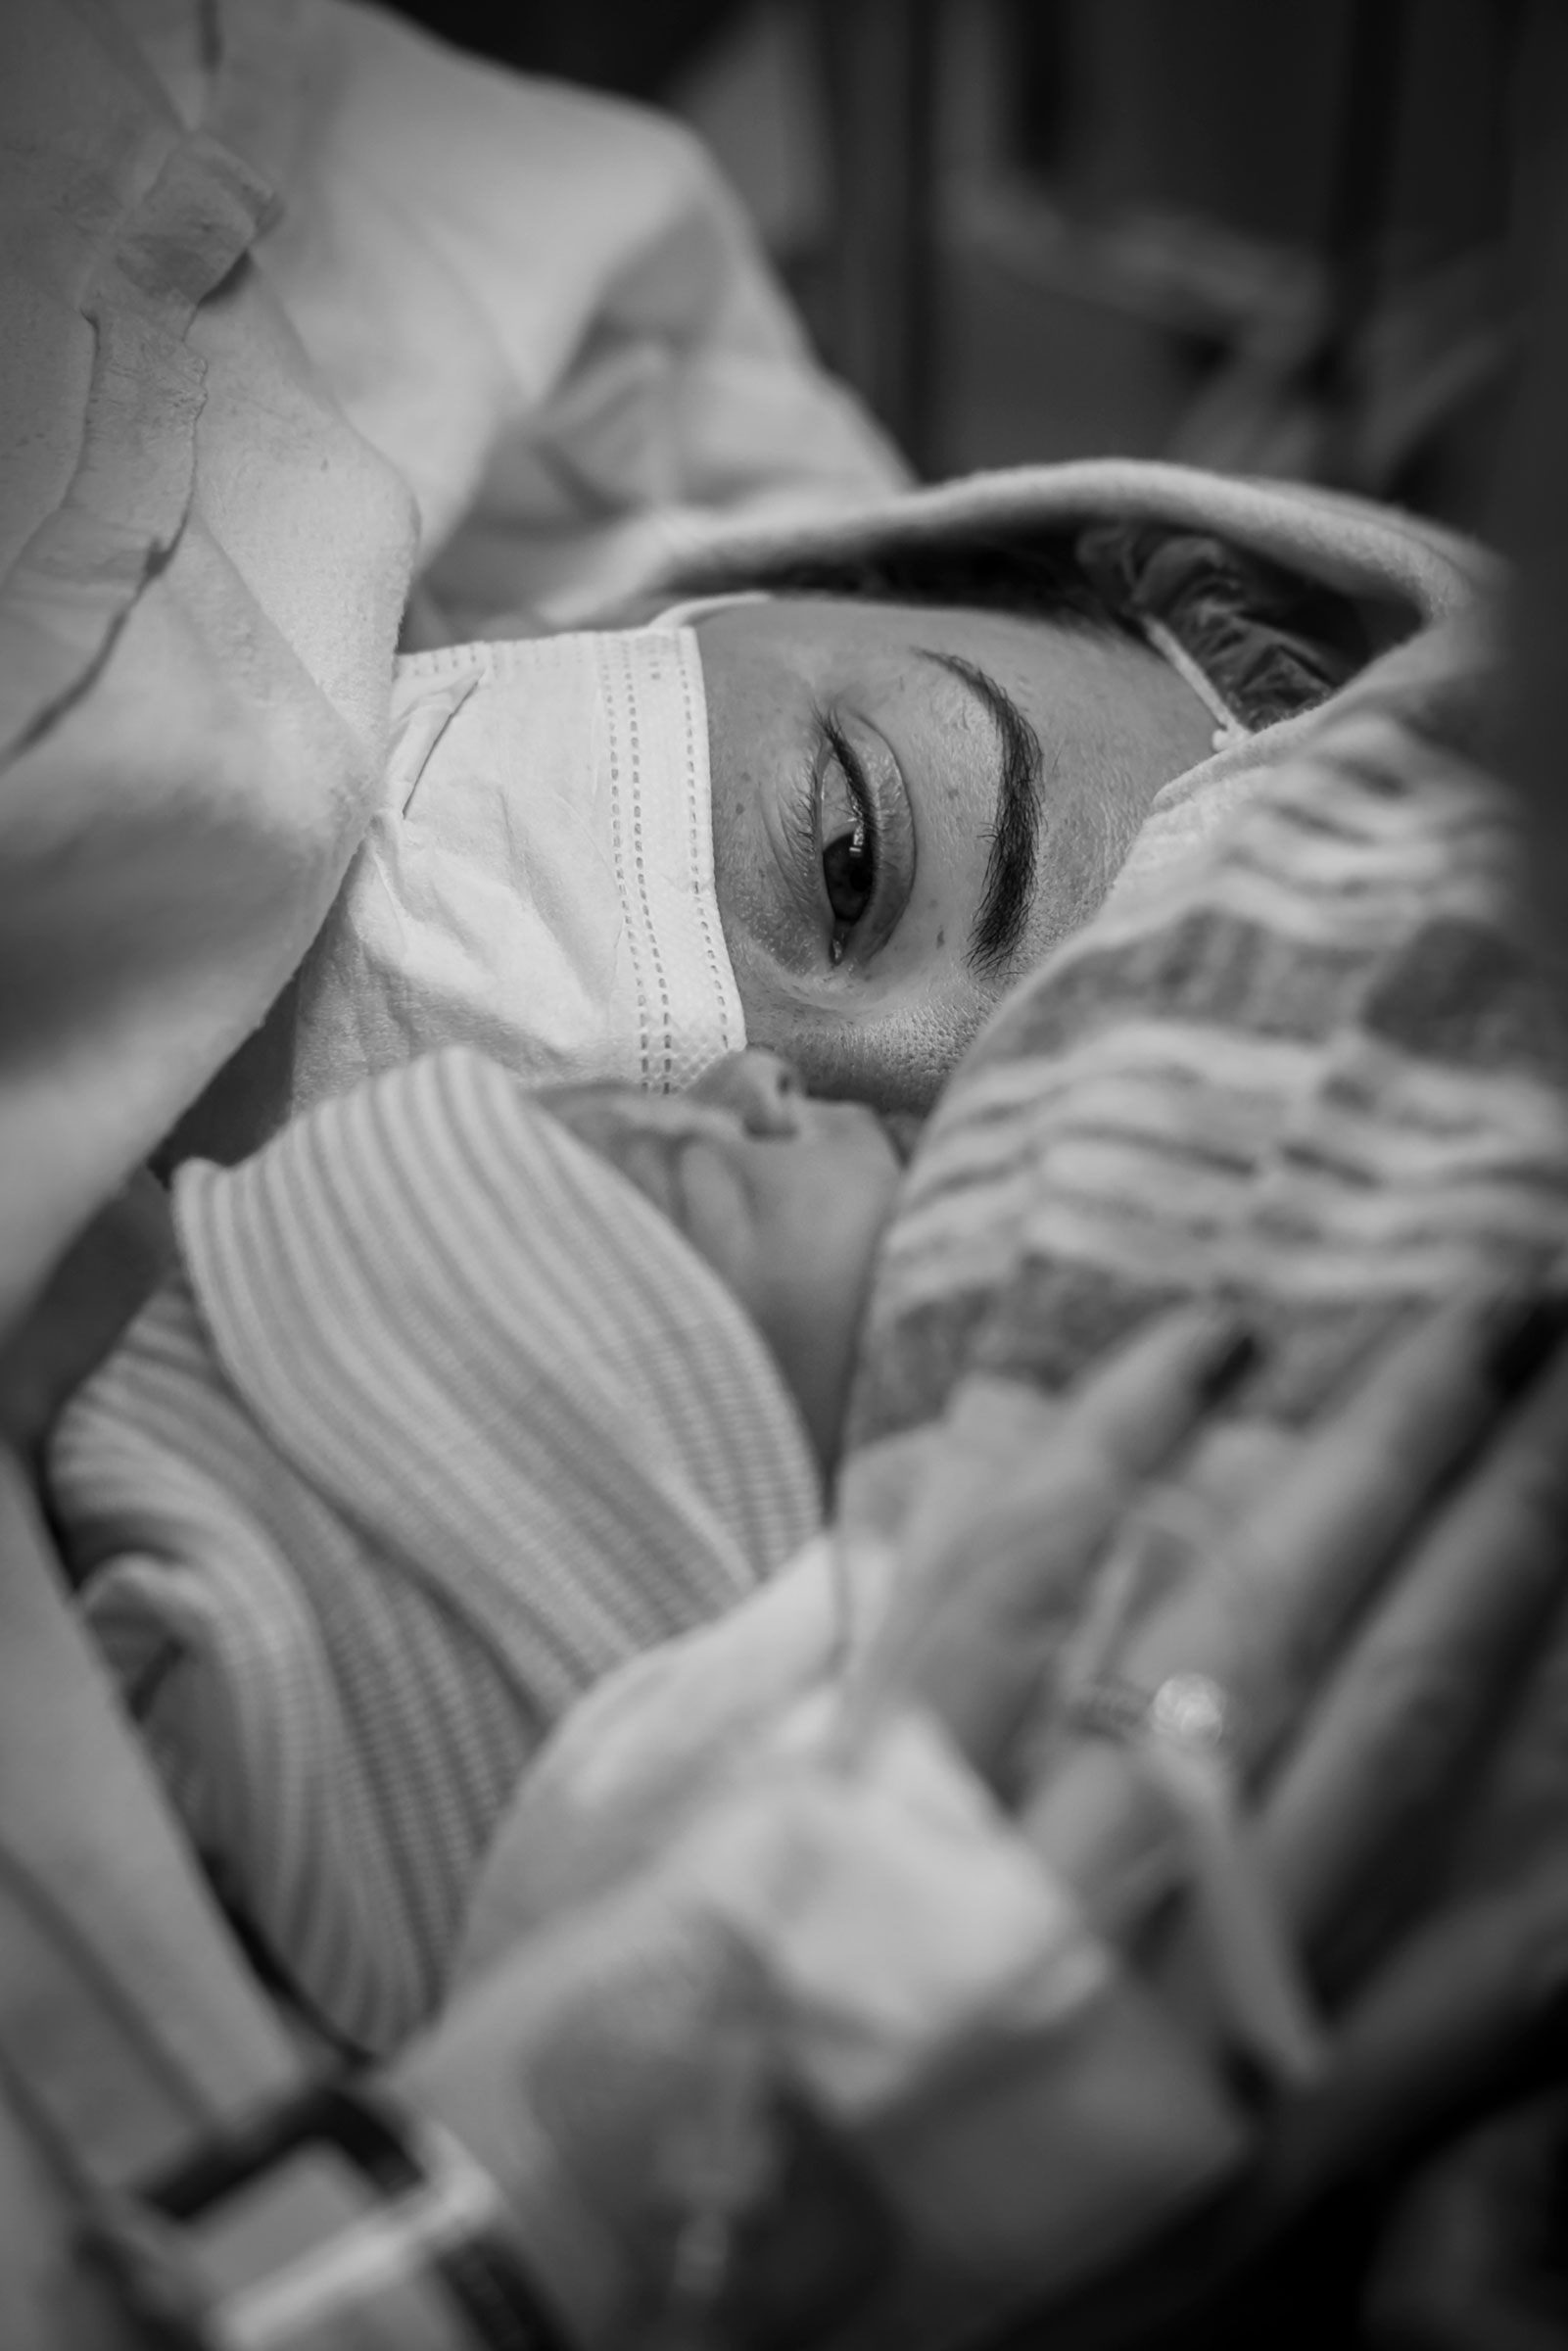 Megan Keeton, 31, immediately after a cesarean-section delivery. Complications from two earlier pregnancies ó one resulting in a stillbirth, the other in the birth of her daughter, Aryia, now 7, who has spastic quadriplegia cerebral palsy ó led doctors to tell Keeton she should not become pregnant again because of the risks to her health. (She had a stroke soon after her daughterís birth.) But just before she was going to make an appointment to get her tubes tied late last year, she found out she was pregnant for a third time. ìI was asked if I wanted to have an abortion, and I said no,î Keeton says.At a time when maternal mortality is declining worldwide, the U.S. ranks last overall among industrialized countries. The Cleveland Clinic's maternal-fetal medicine program supports women with an underlying medical condition, problems with poor pregnancy outcomes, or a suspected or known problem with the baby (fetus). Their high-risk pregnancy-related services include preconception planning, pregnancy management (primary or consultative) and delivery. The U.S. Supreme Courtís decision in the Dobbs v. Jackson Womenís Health Organization made treating women more difficult when it overturned nearly a half century of precedent protecting patientsí right to critical reproductive health care.